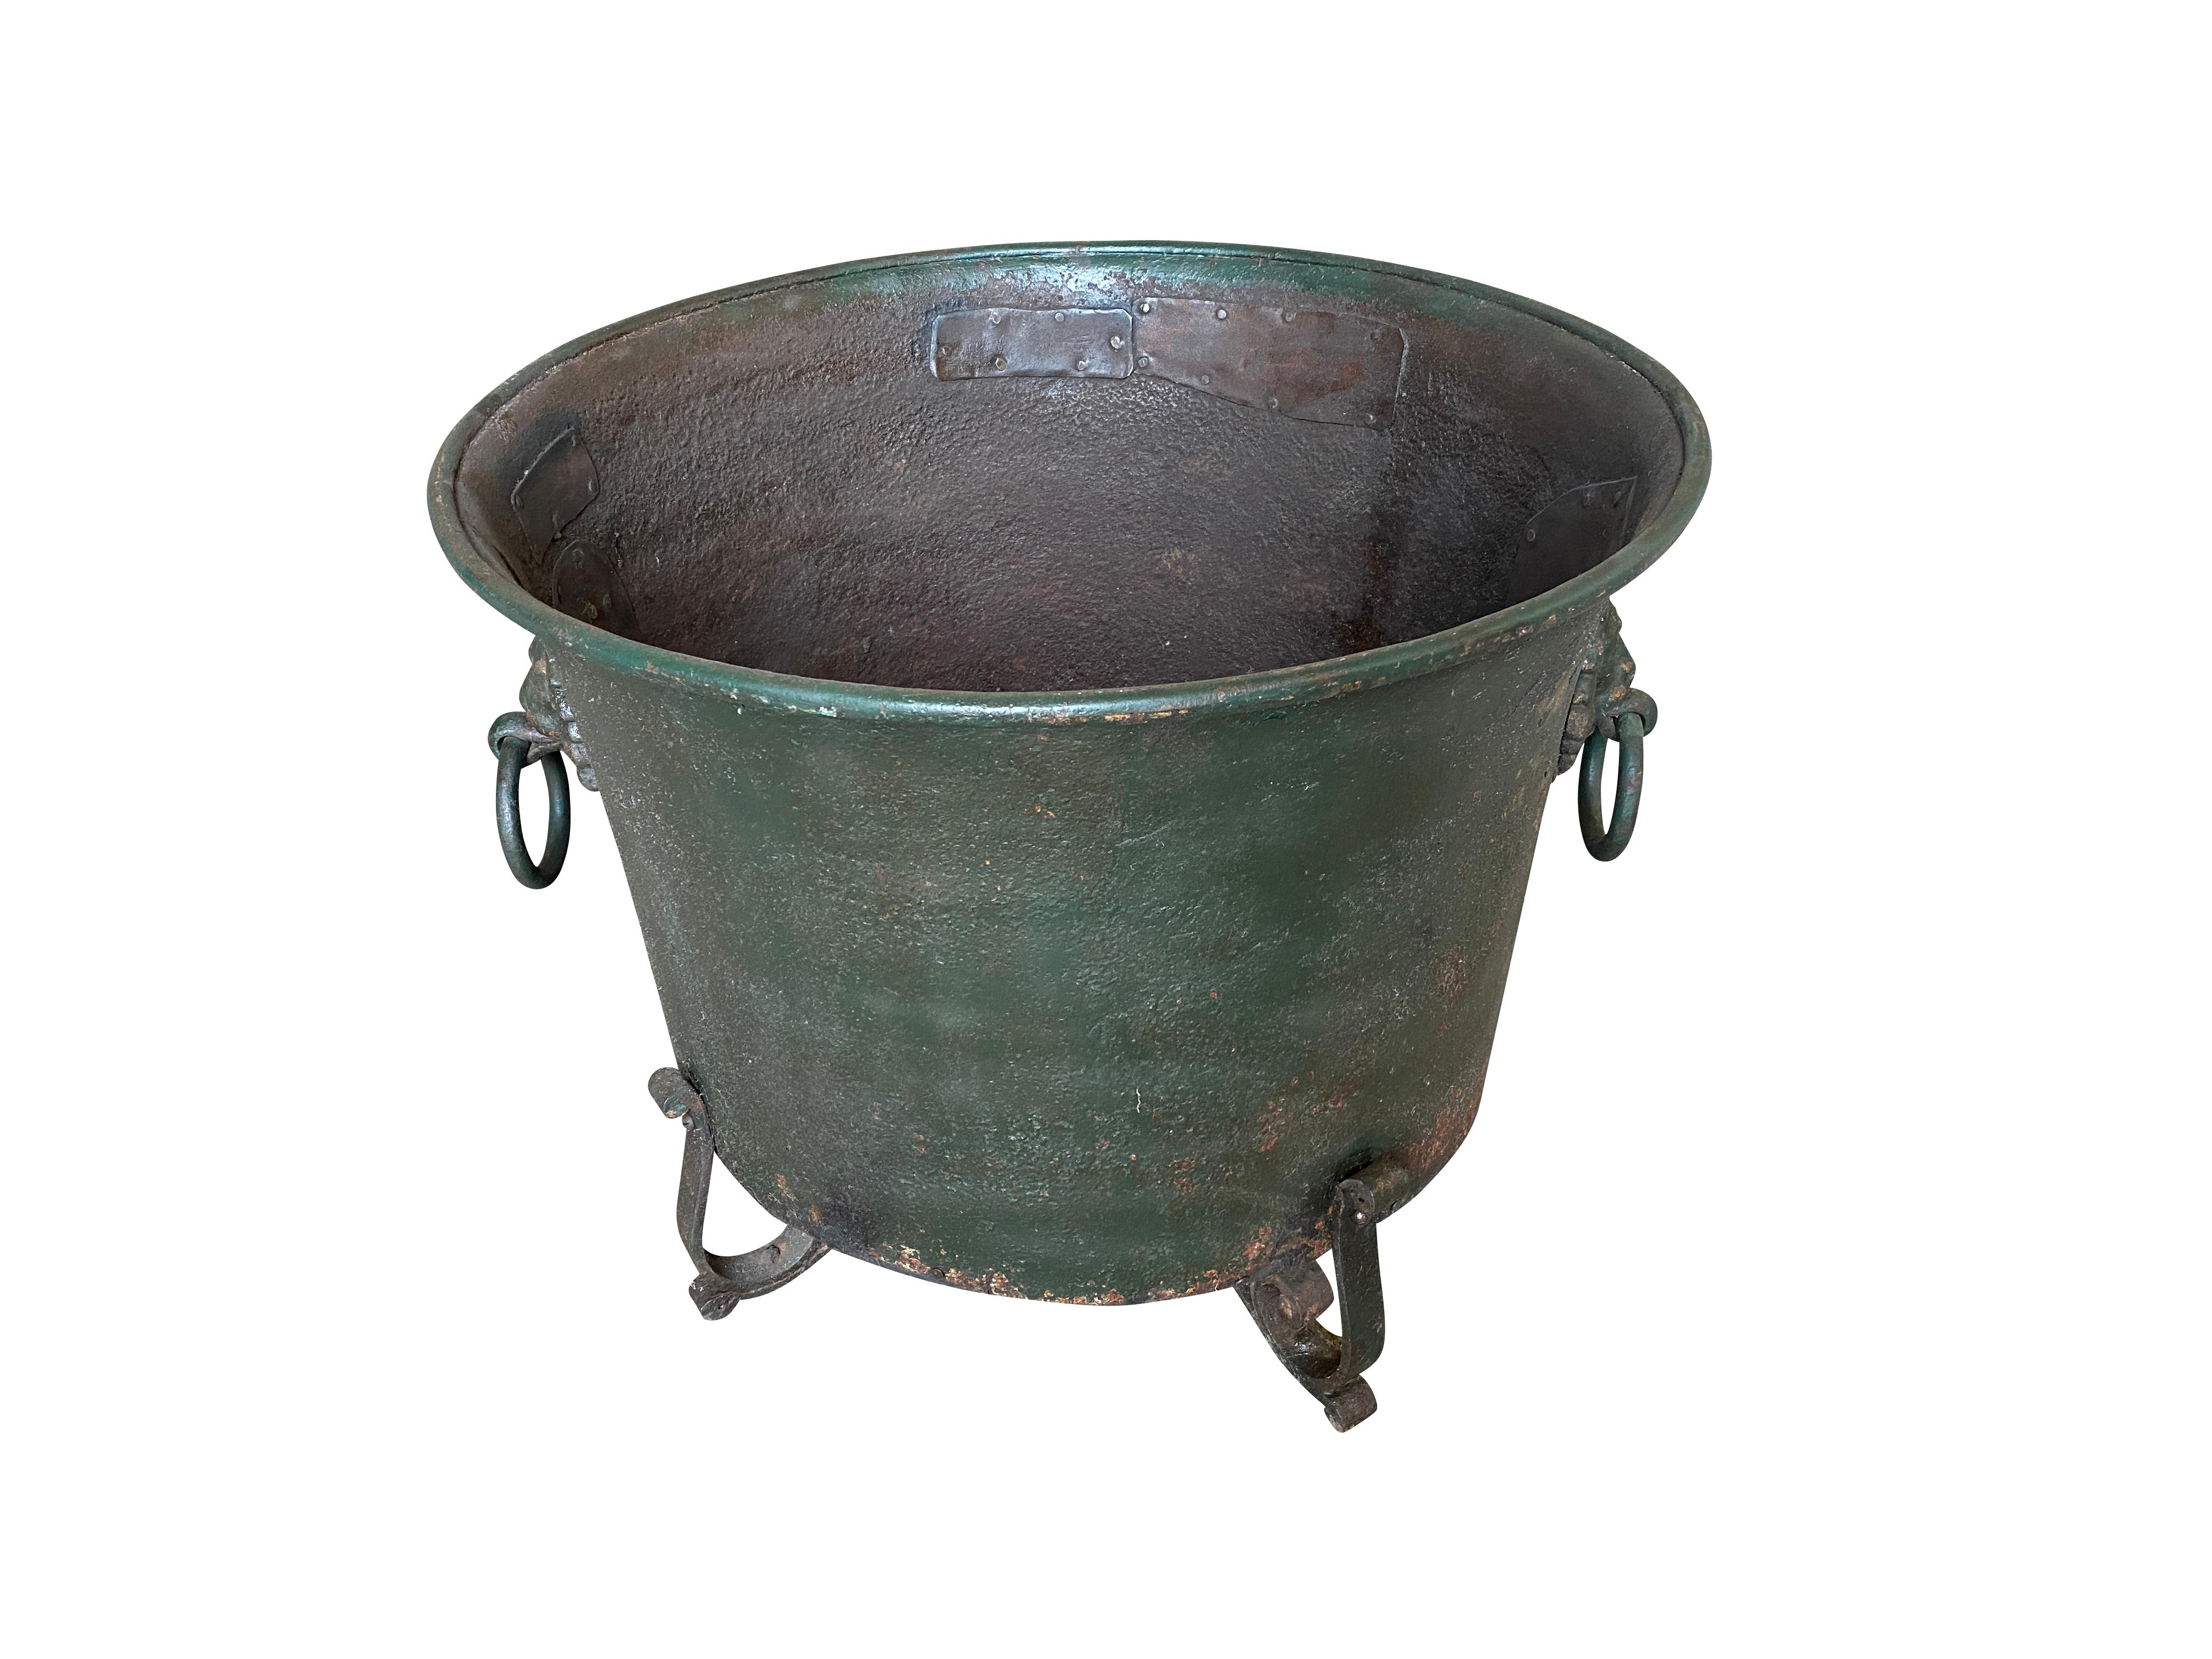 A very handsome early 19th century Jardiniere from the Genoa region of Italy. Beautifully crafted from painted iron with lion's head handles and raised on feet.